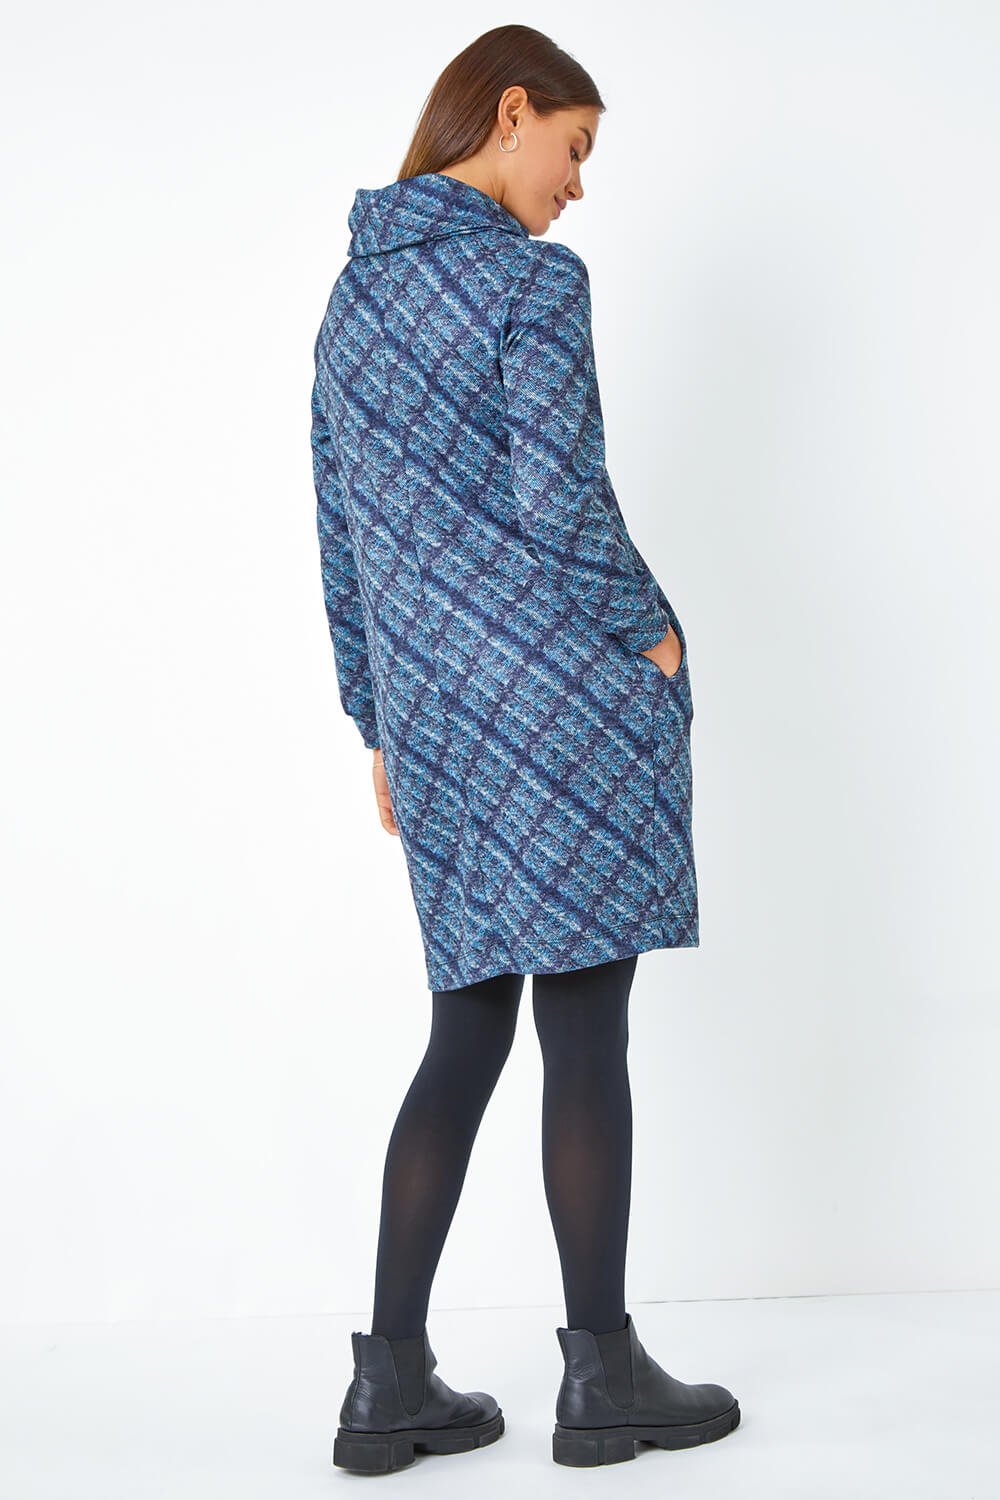 Blue Checked Cowl Neck Stretch Dress, Image 3 of 4